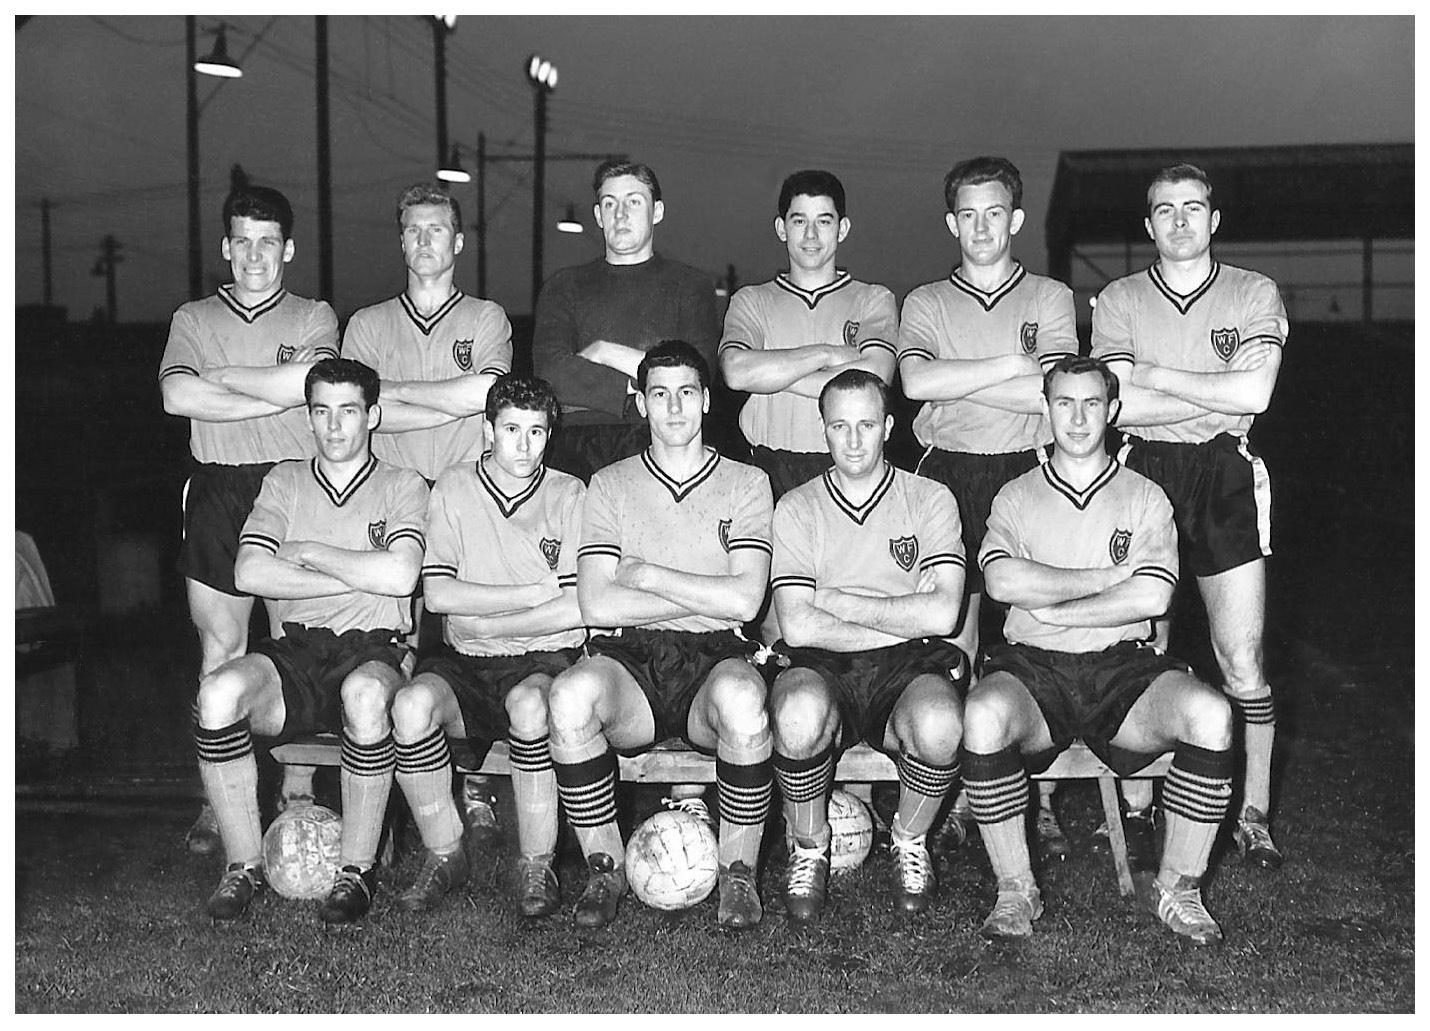 Ron Burgess promotion-winning 1959/60 team featuring the record-breaking forward pairing of Cliff Holton and Dennis Uphill 